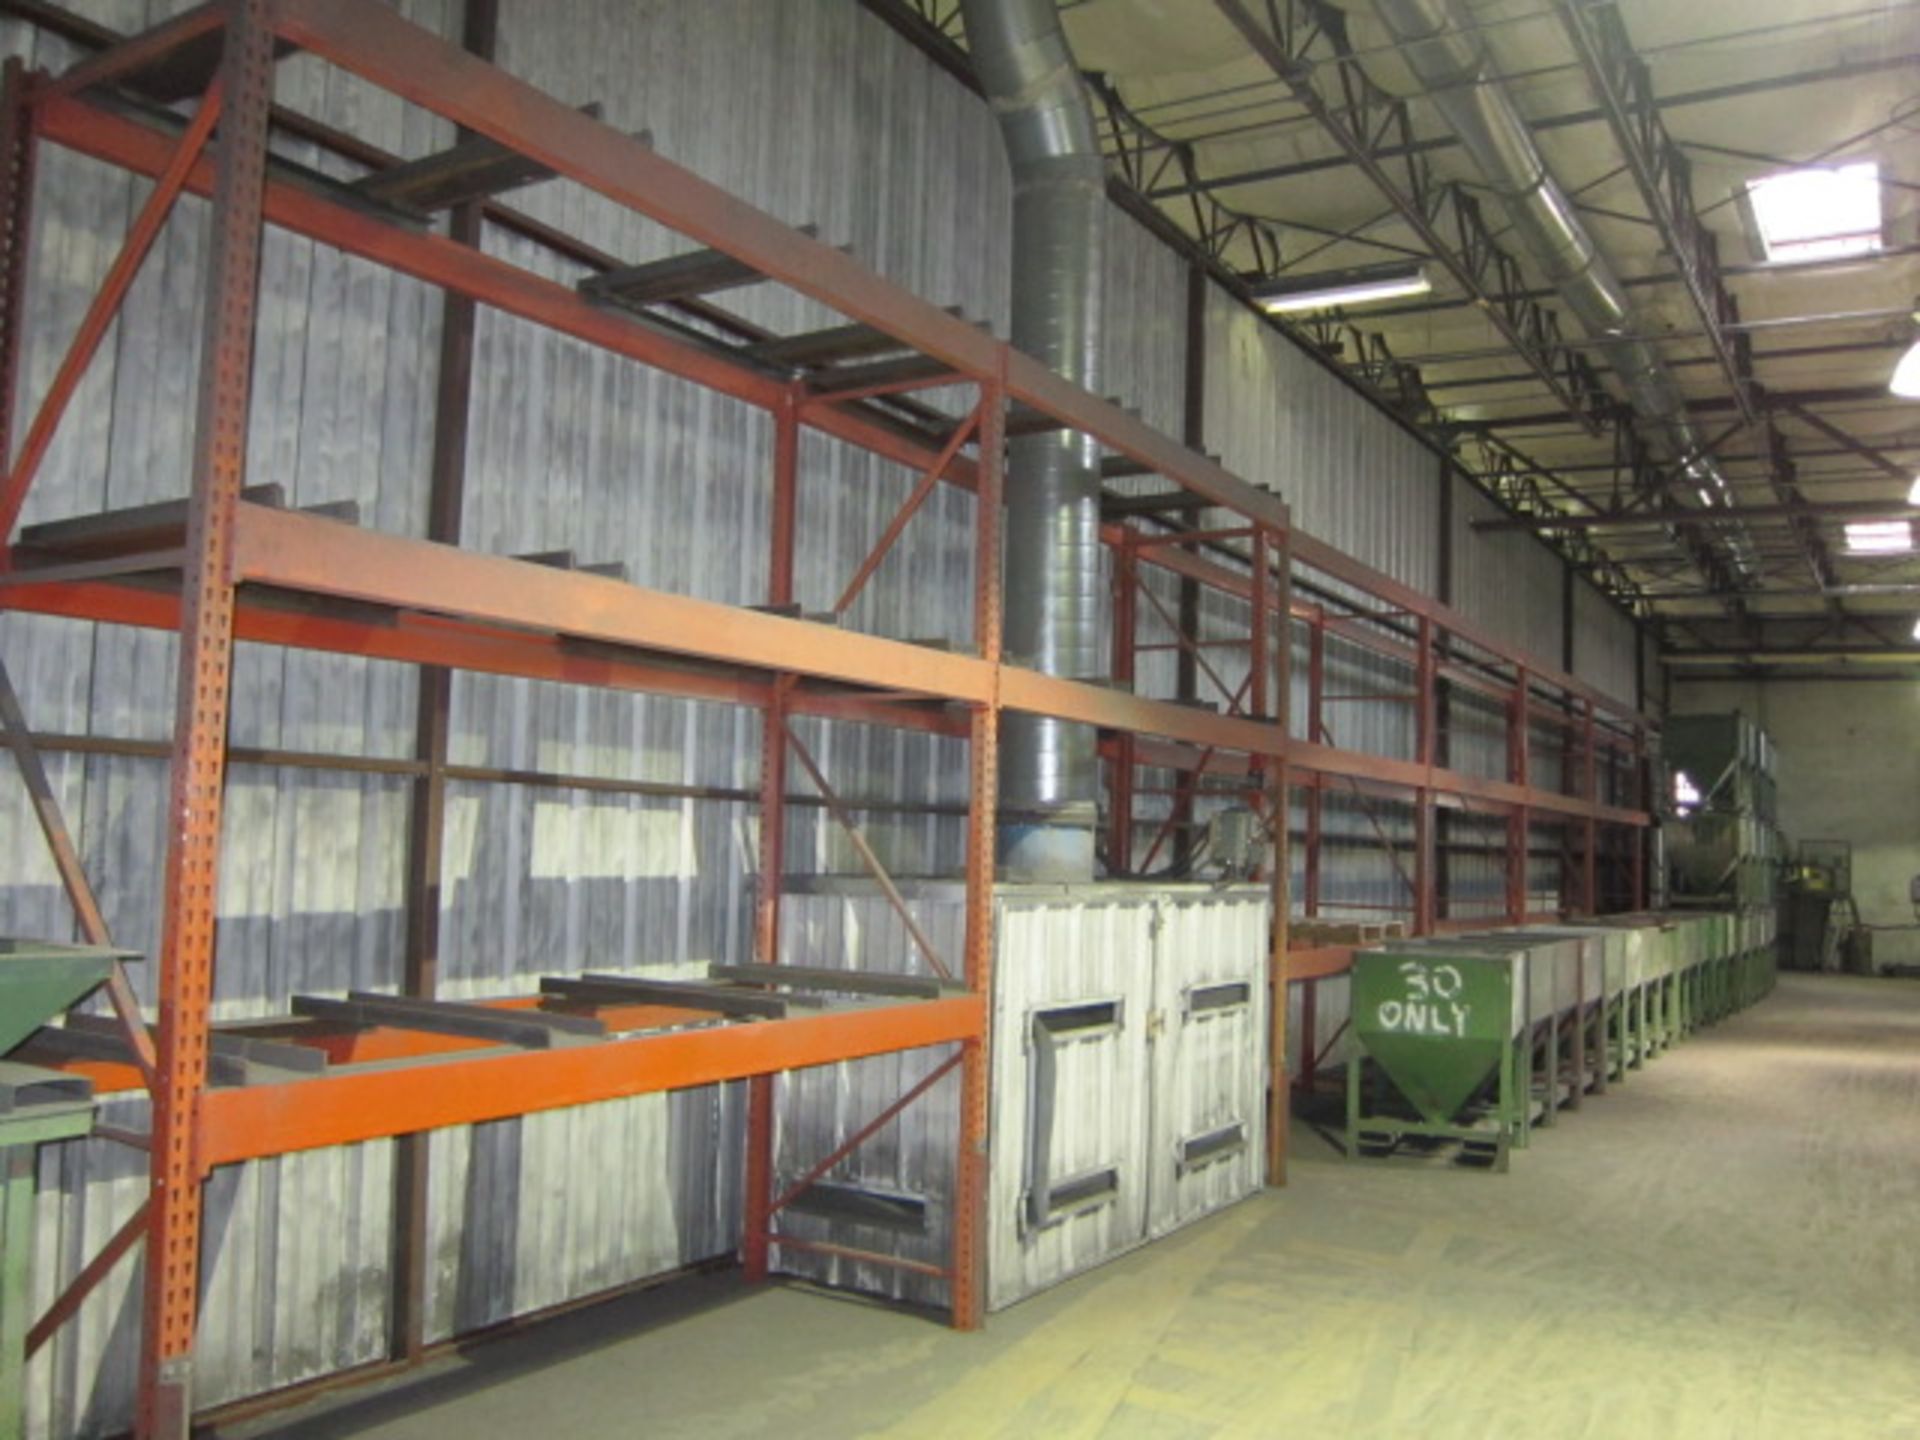 LOT OF PALLET RACK SECTIONS (8), 12' ht. x 10"W. x 3' dp.